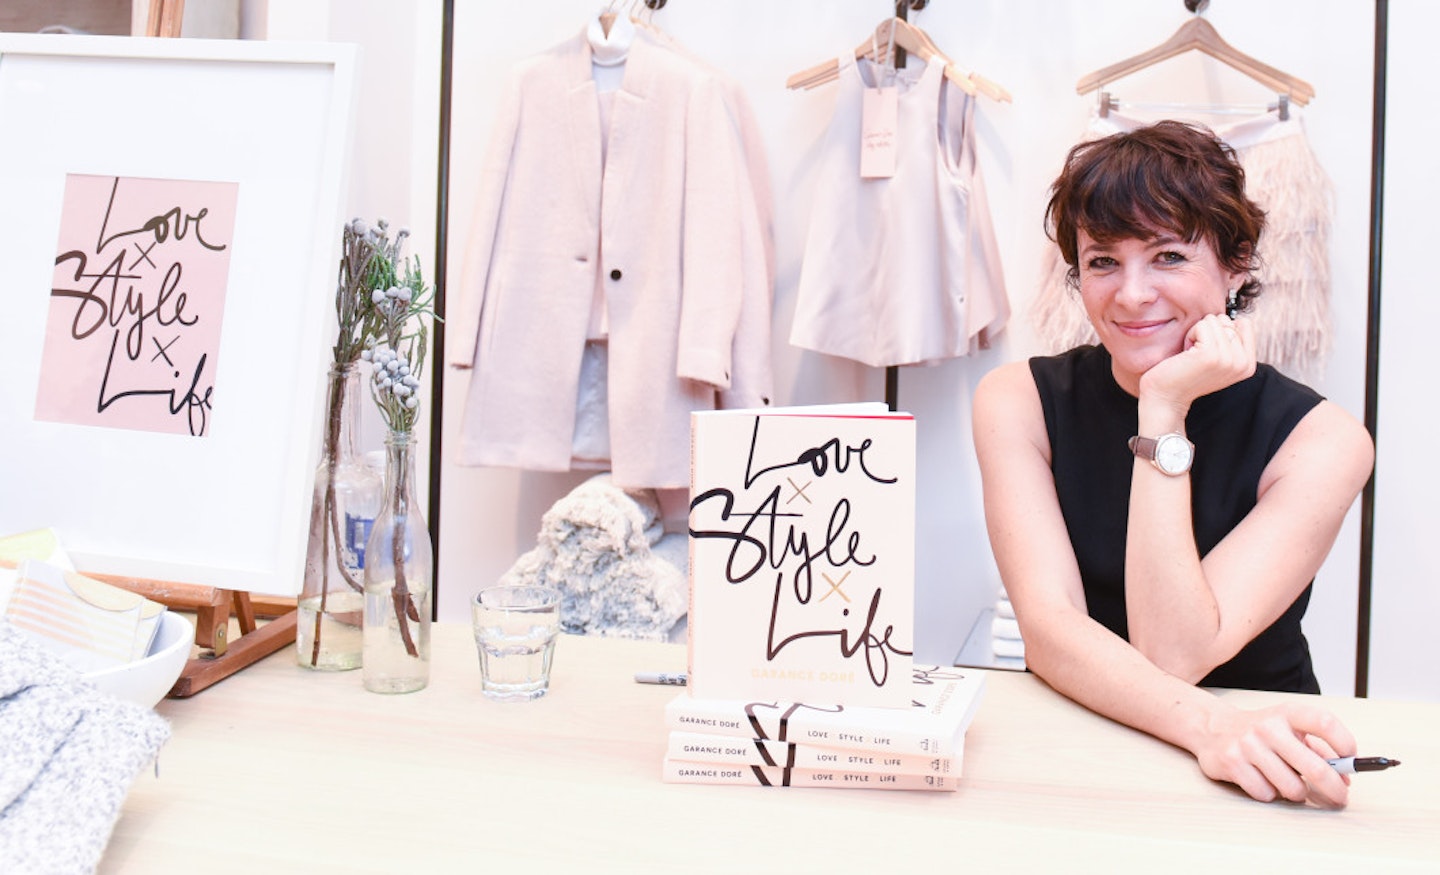 Garance Dore At Her Love x Style x Life Book Signing In LA &ndash; Dec 2015 [Rex]